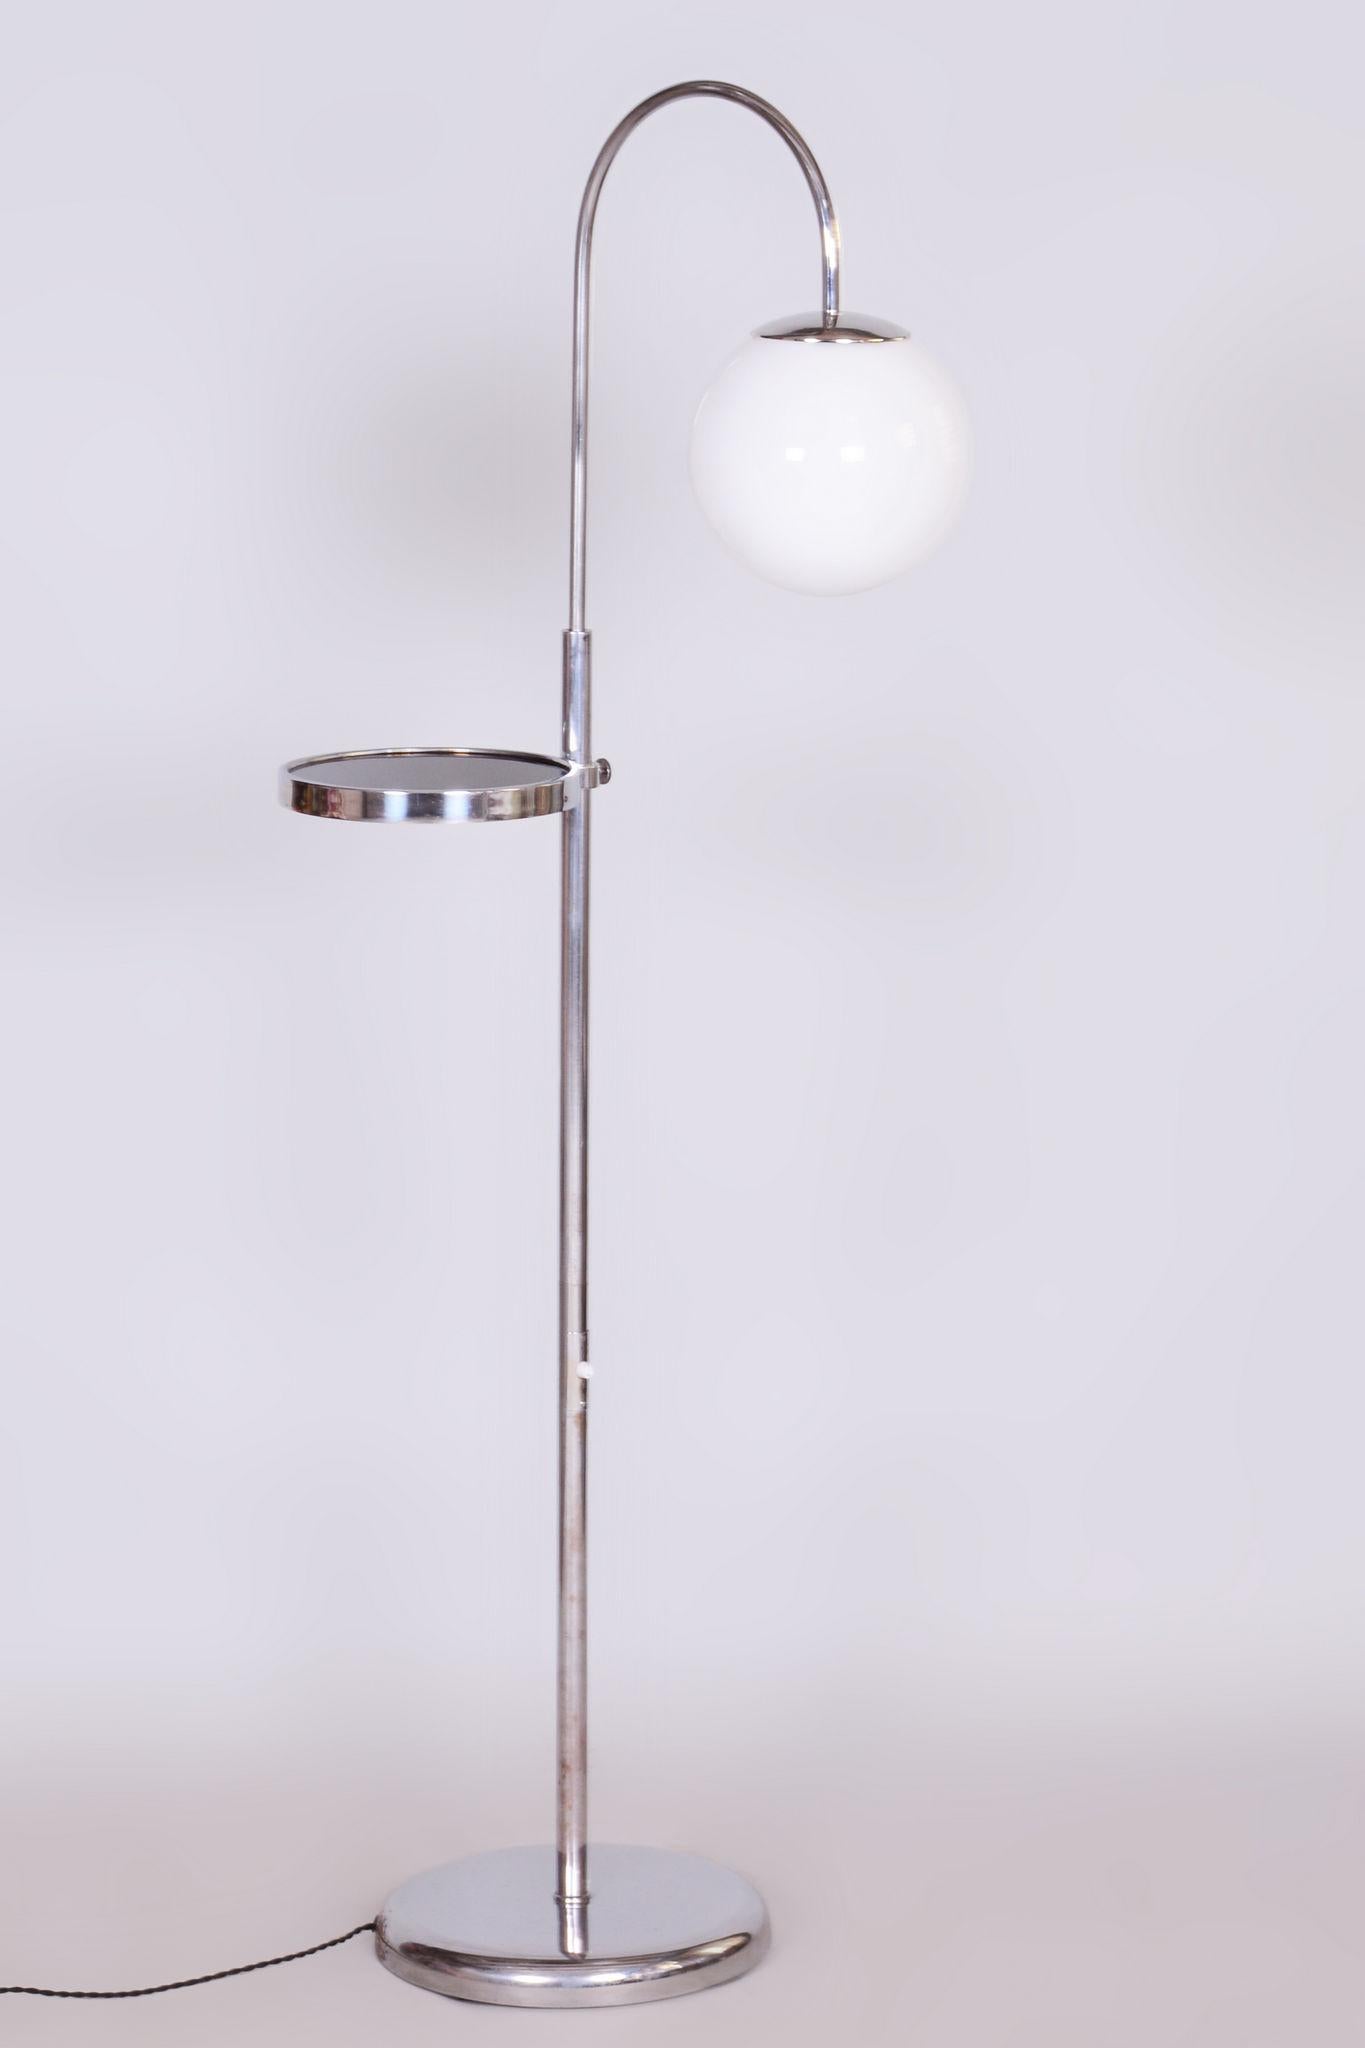 Restored Bauhaus floor lamp

Origin: Czechia 
Period: 1930-1939
Material: Chrome-plated steel, milk glass

Adjustable lamp height (167 - 185 cm).

Adjustable shelf height.

The chrome parts have been cleaned and professionally restored. 			

This